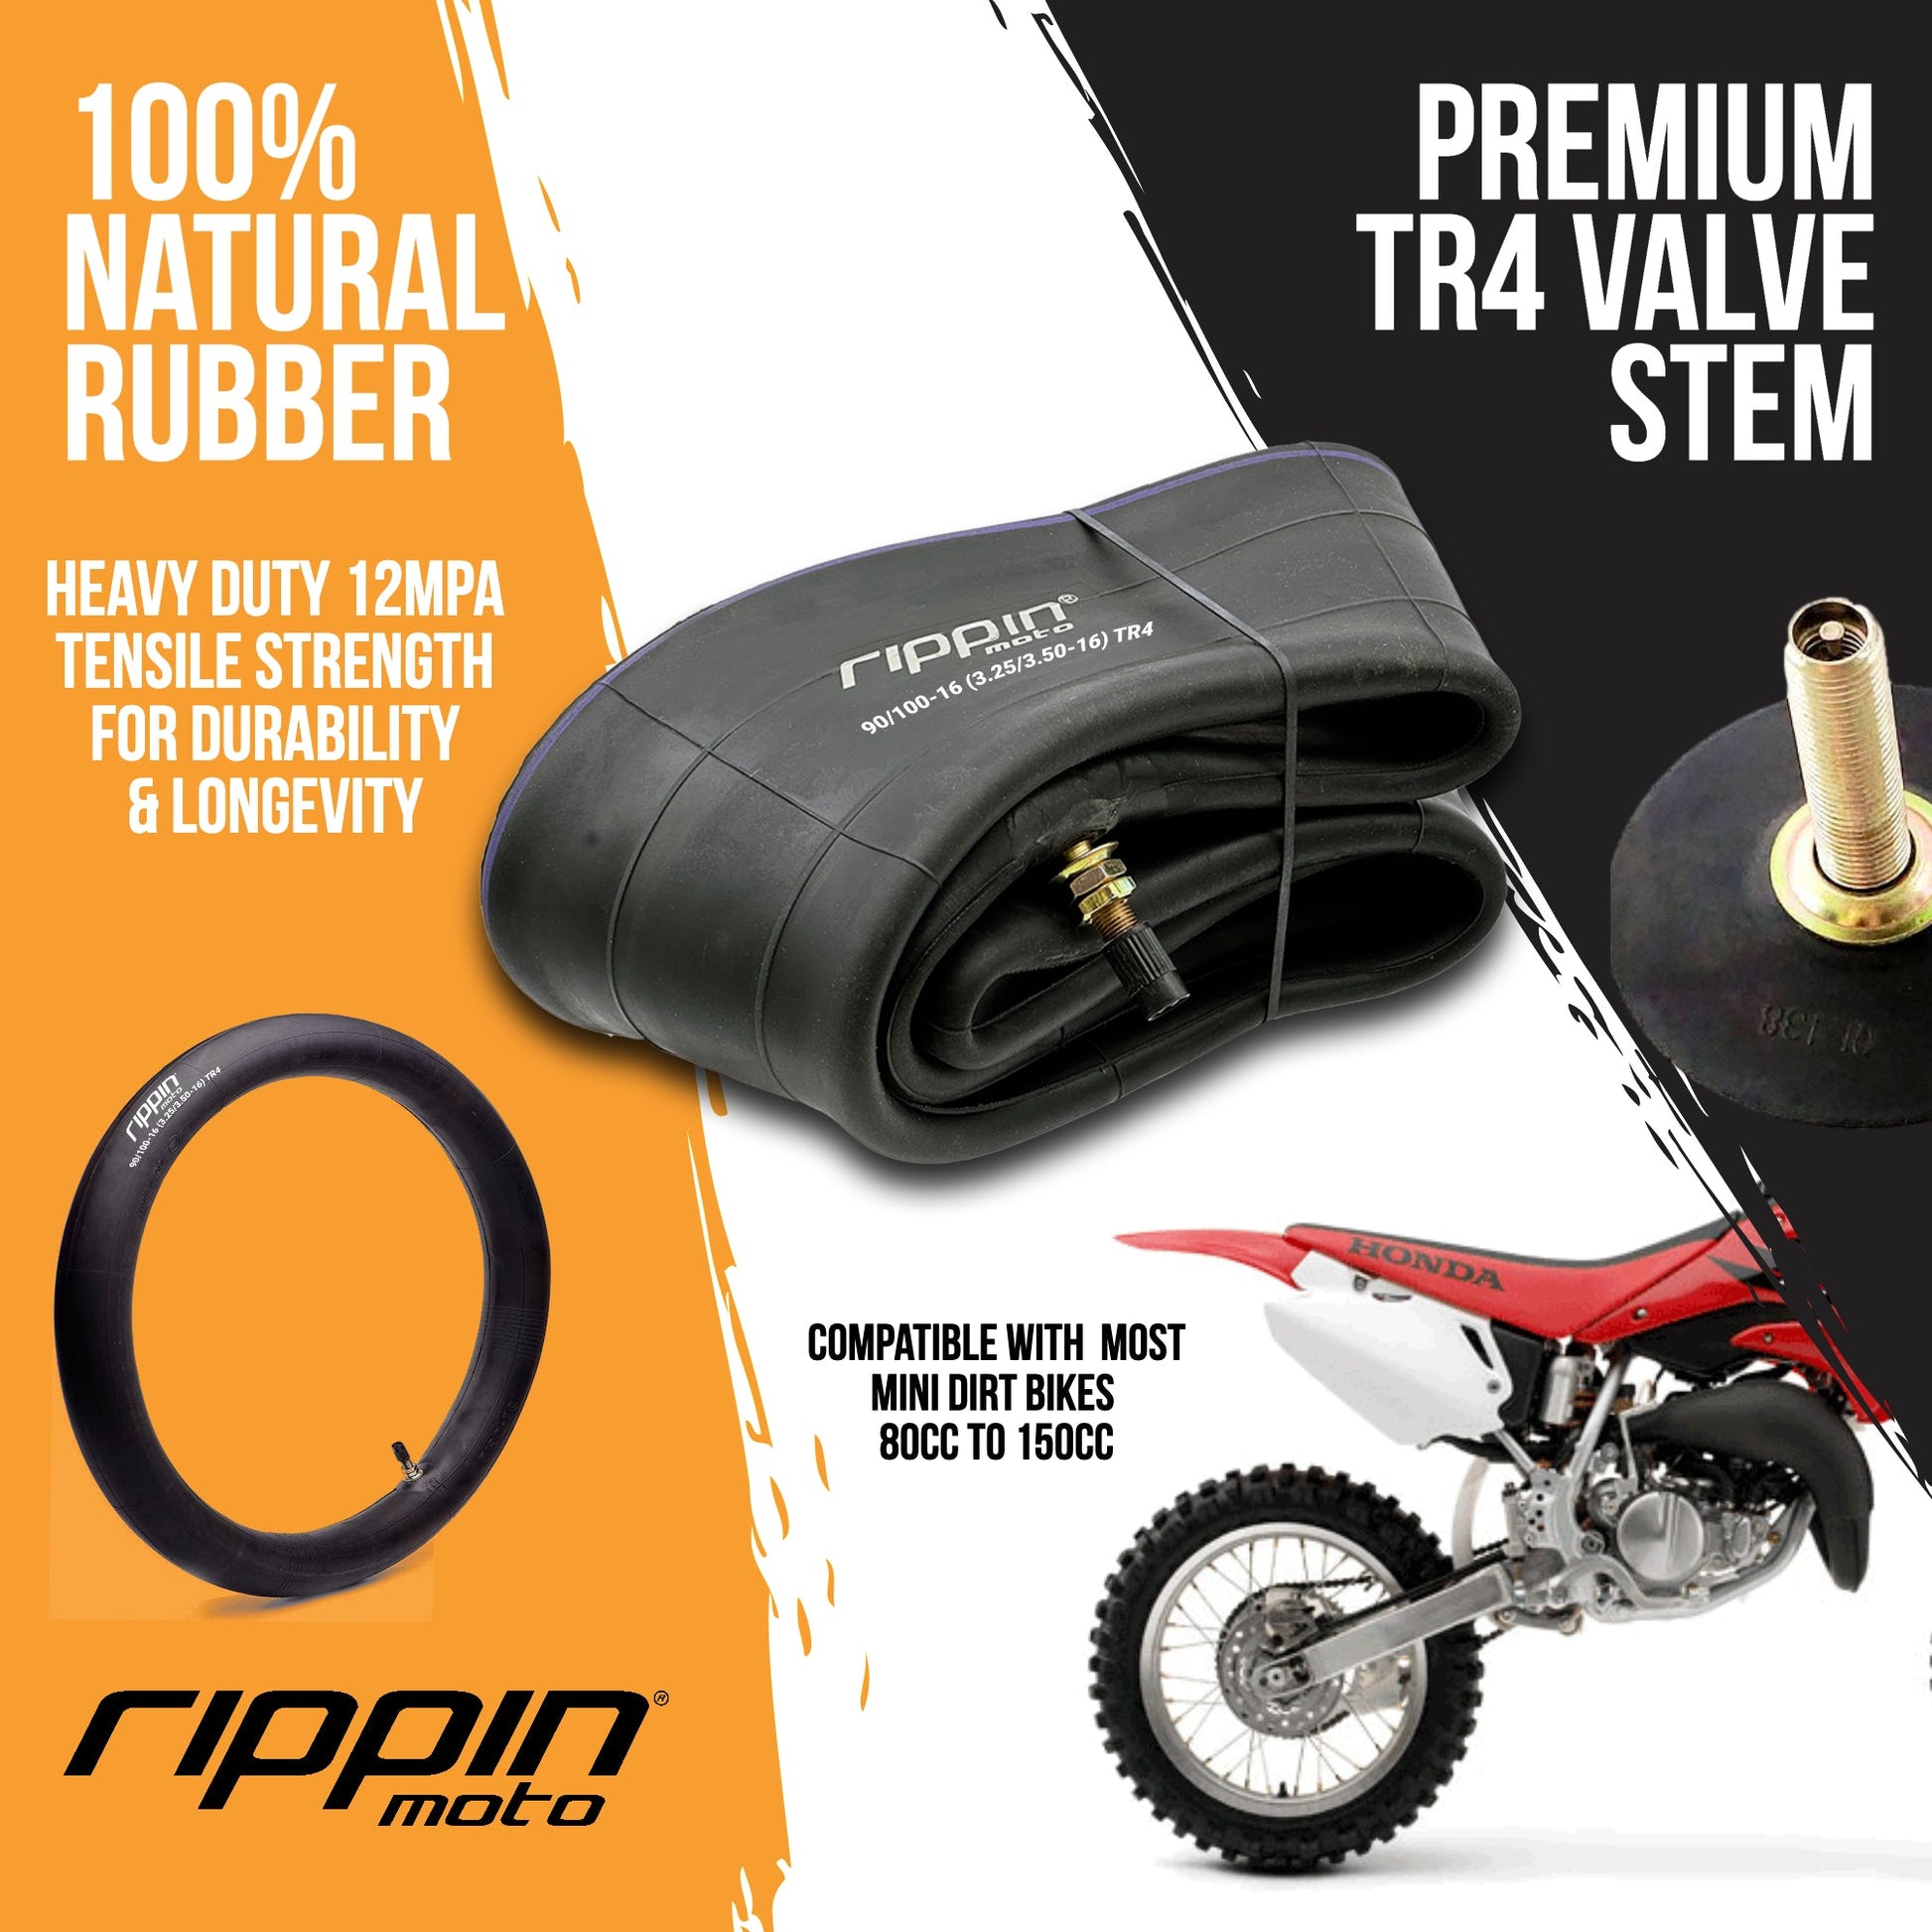 Rippin Moto 90/100-16 (3.25/3.50-16) Heavy Duty Motorcycle Inner Tube - 3mm Thick - REVRides